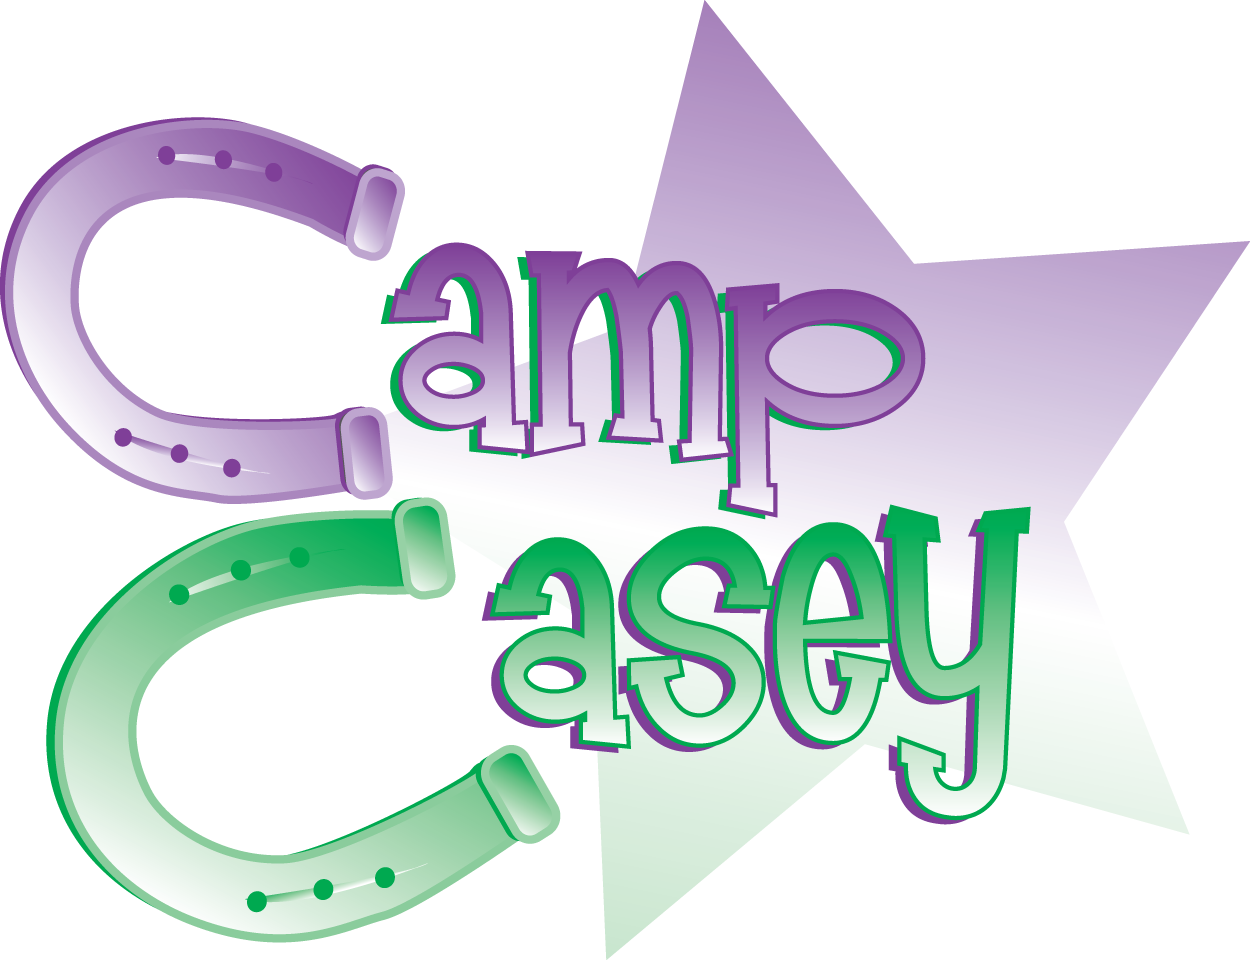 Purple and green Camp Casey logo with star in background